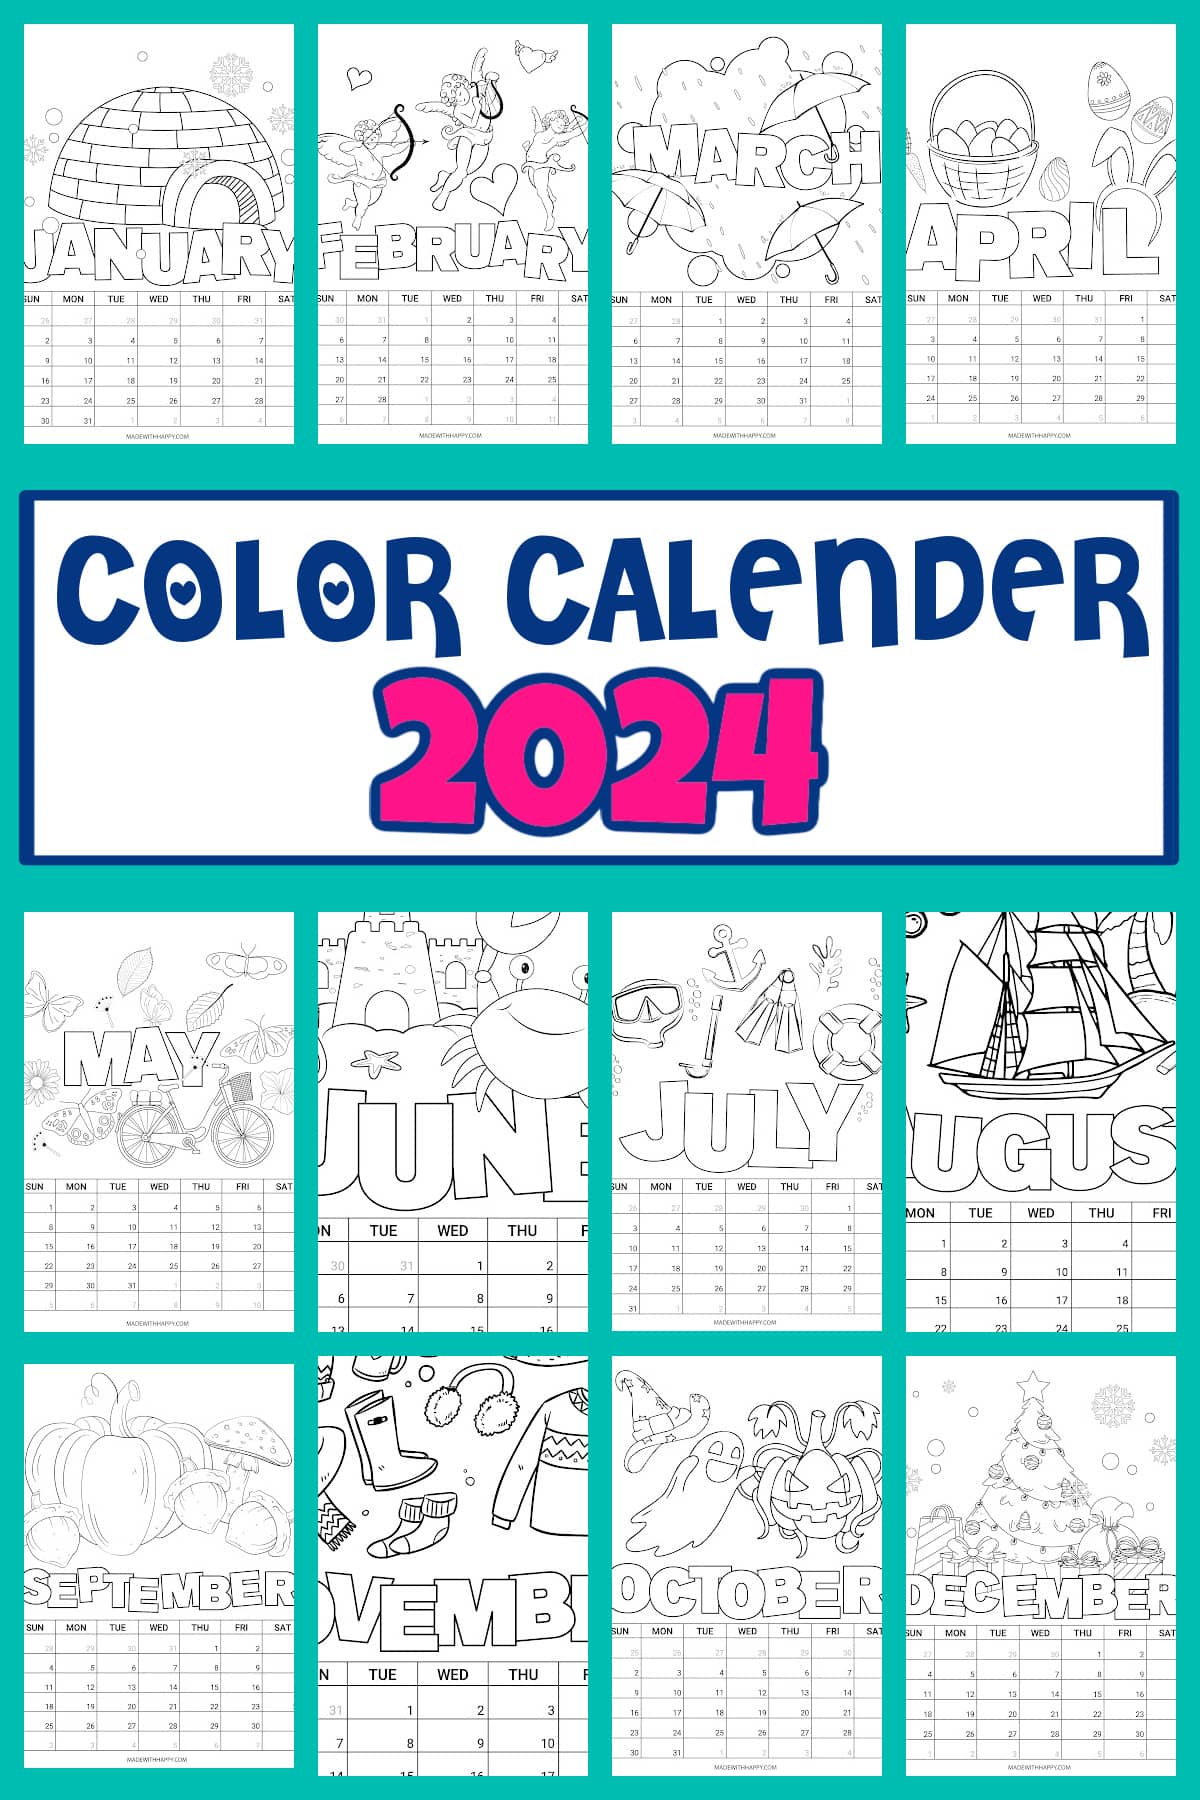 Free Printable Summer Calendar Numbers - Fun-A-Day!